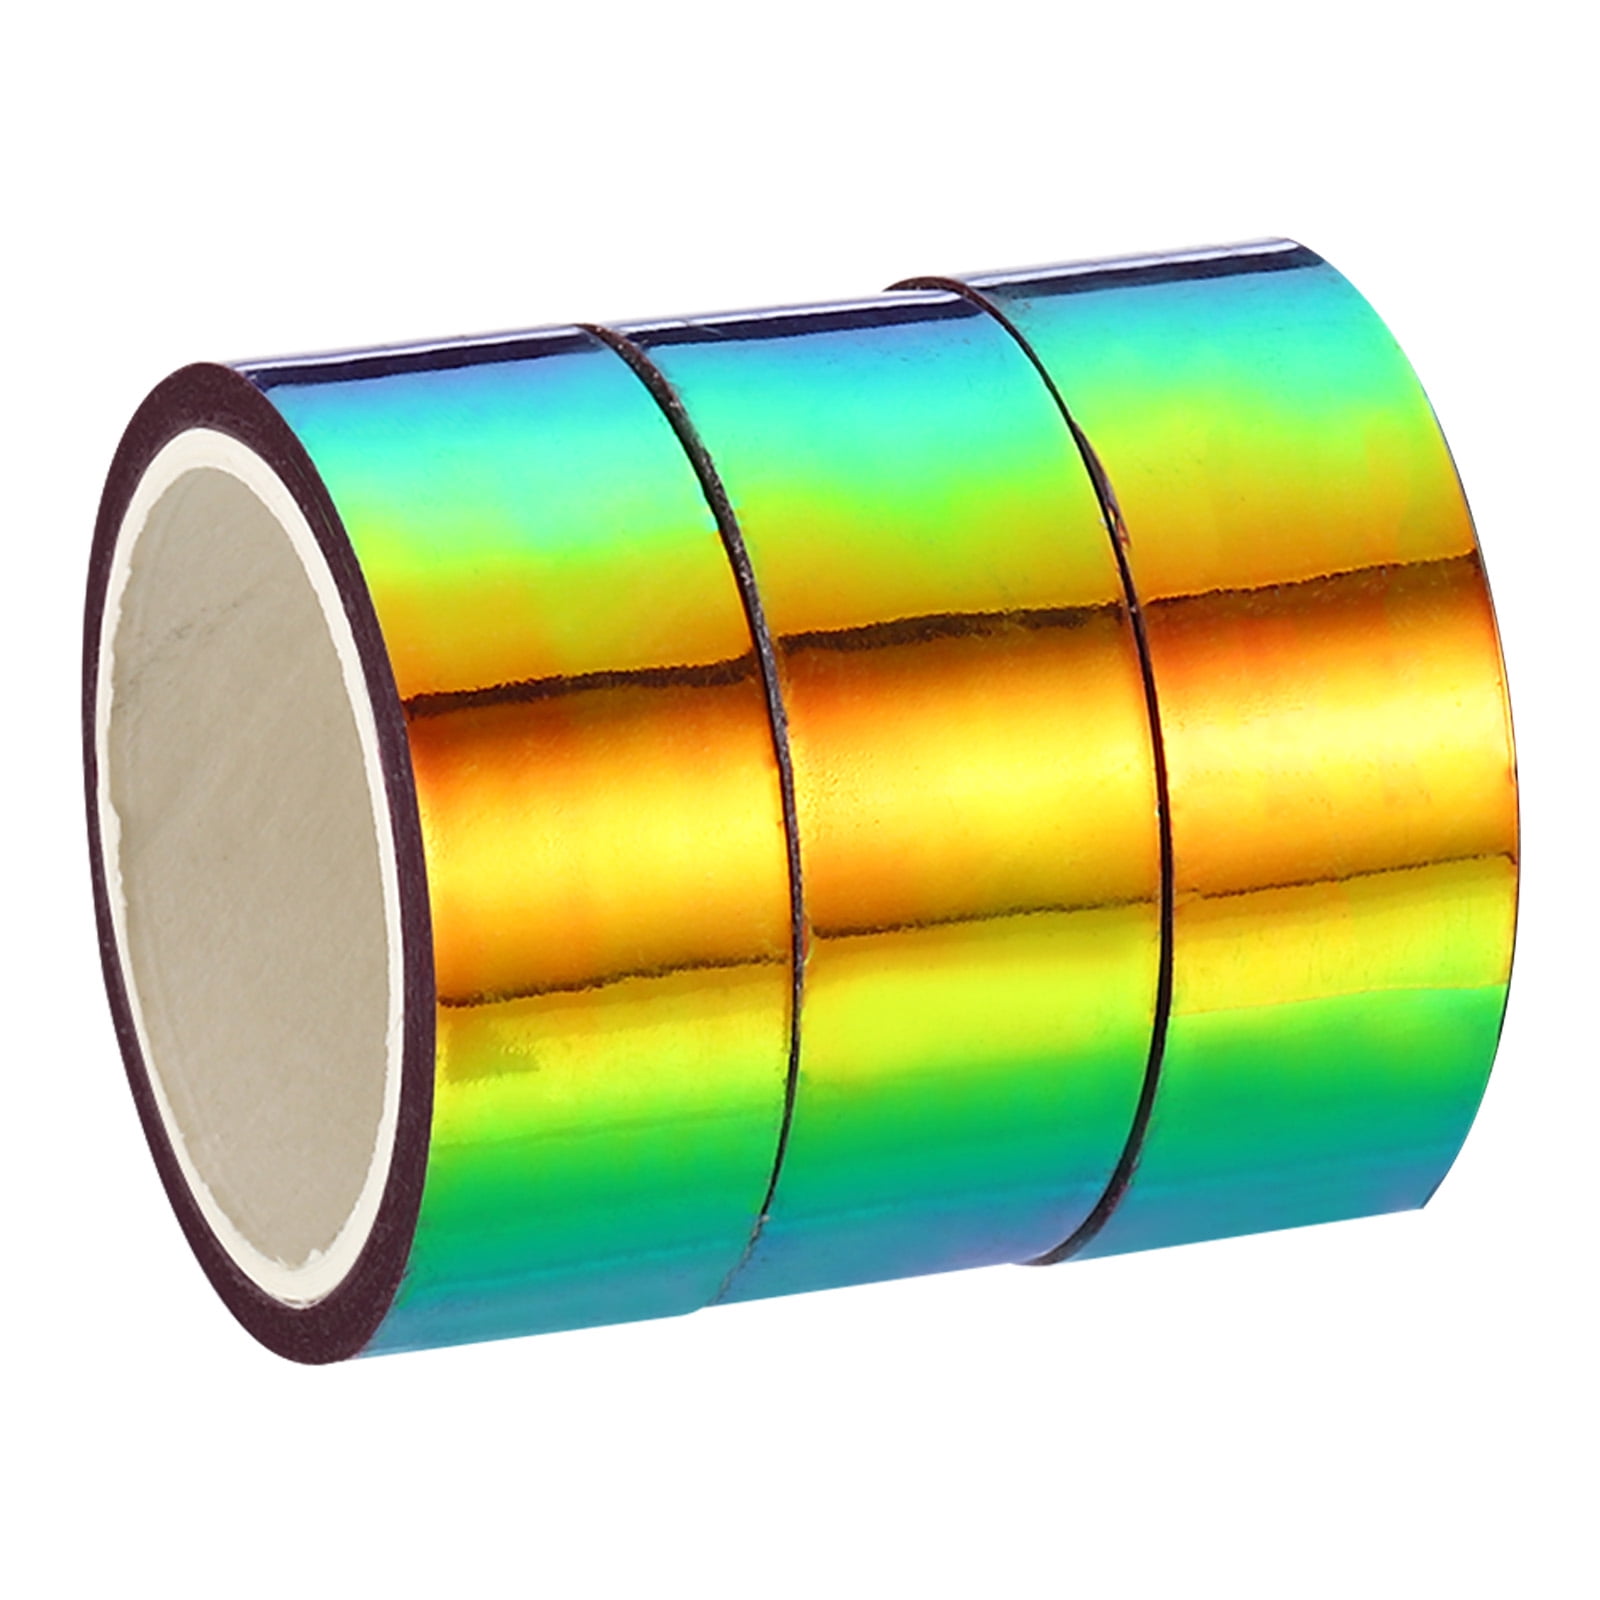 Uxcell 15mmx5m Holographic Tape Adhesive Metallic Foil Masking Sticker,  Purple 3 Roll